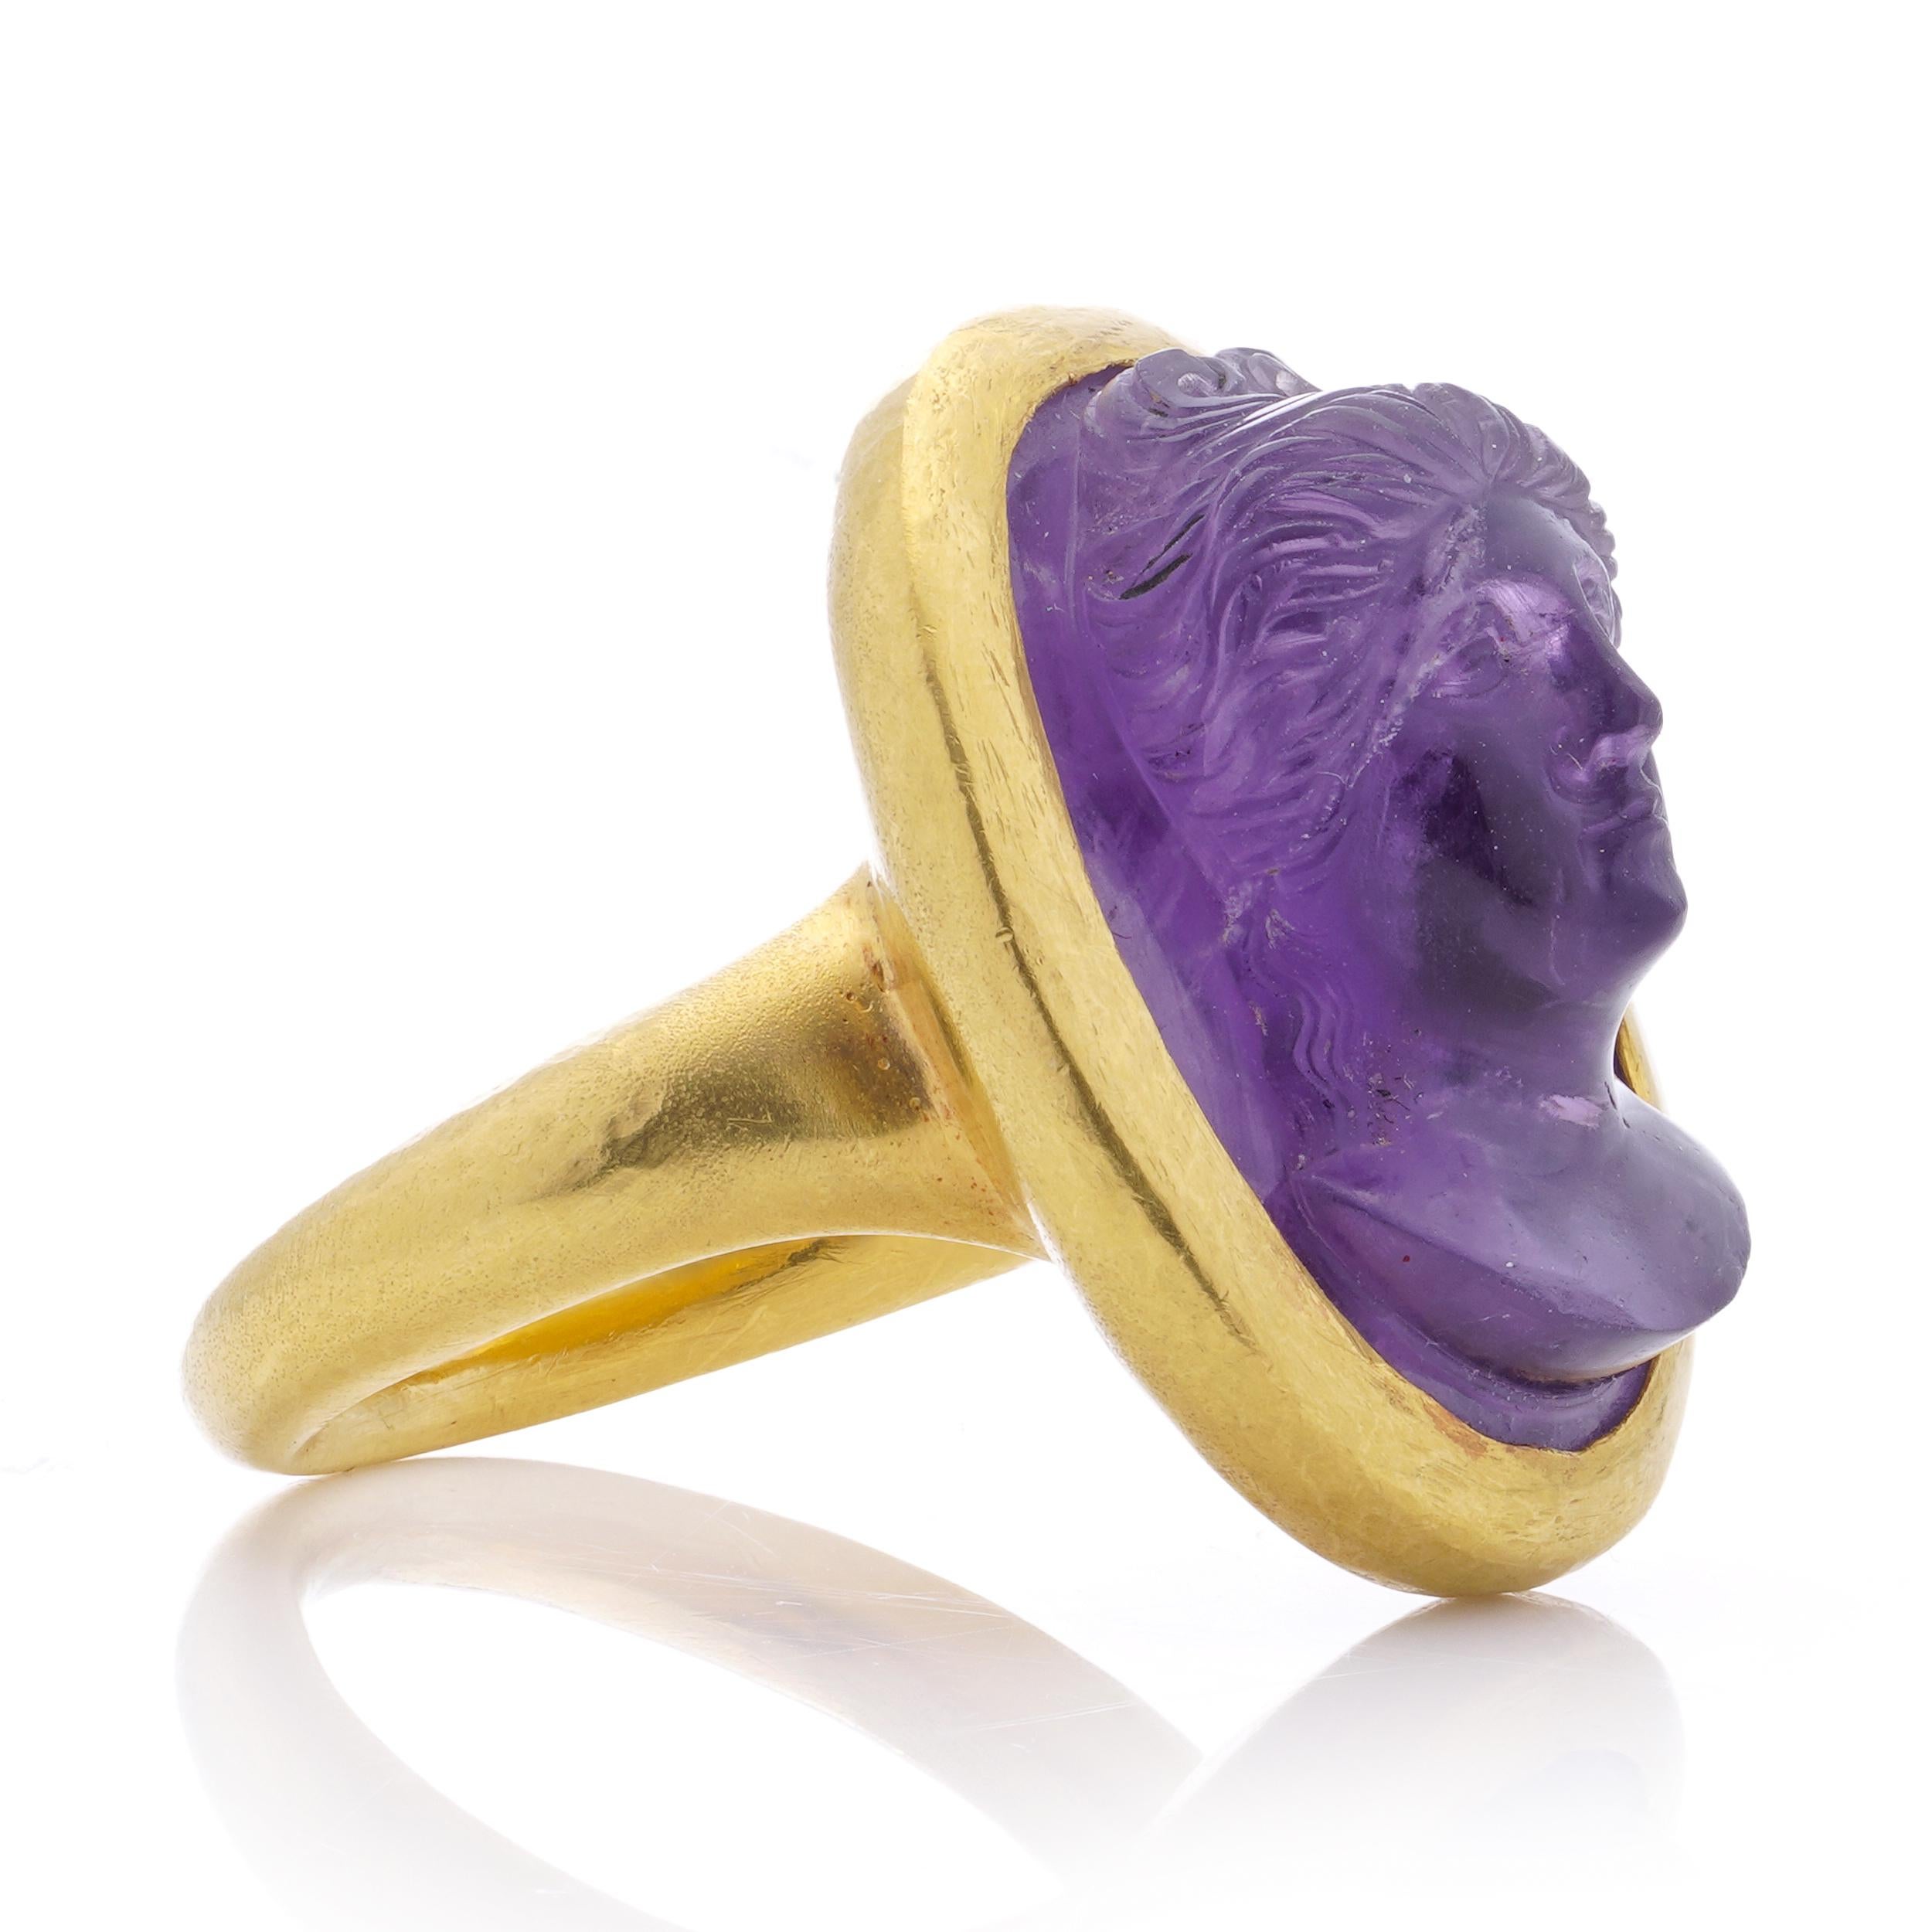  24kt. yellow gold carved amethyst intaglio ring with a woman's portrait For Sale 4